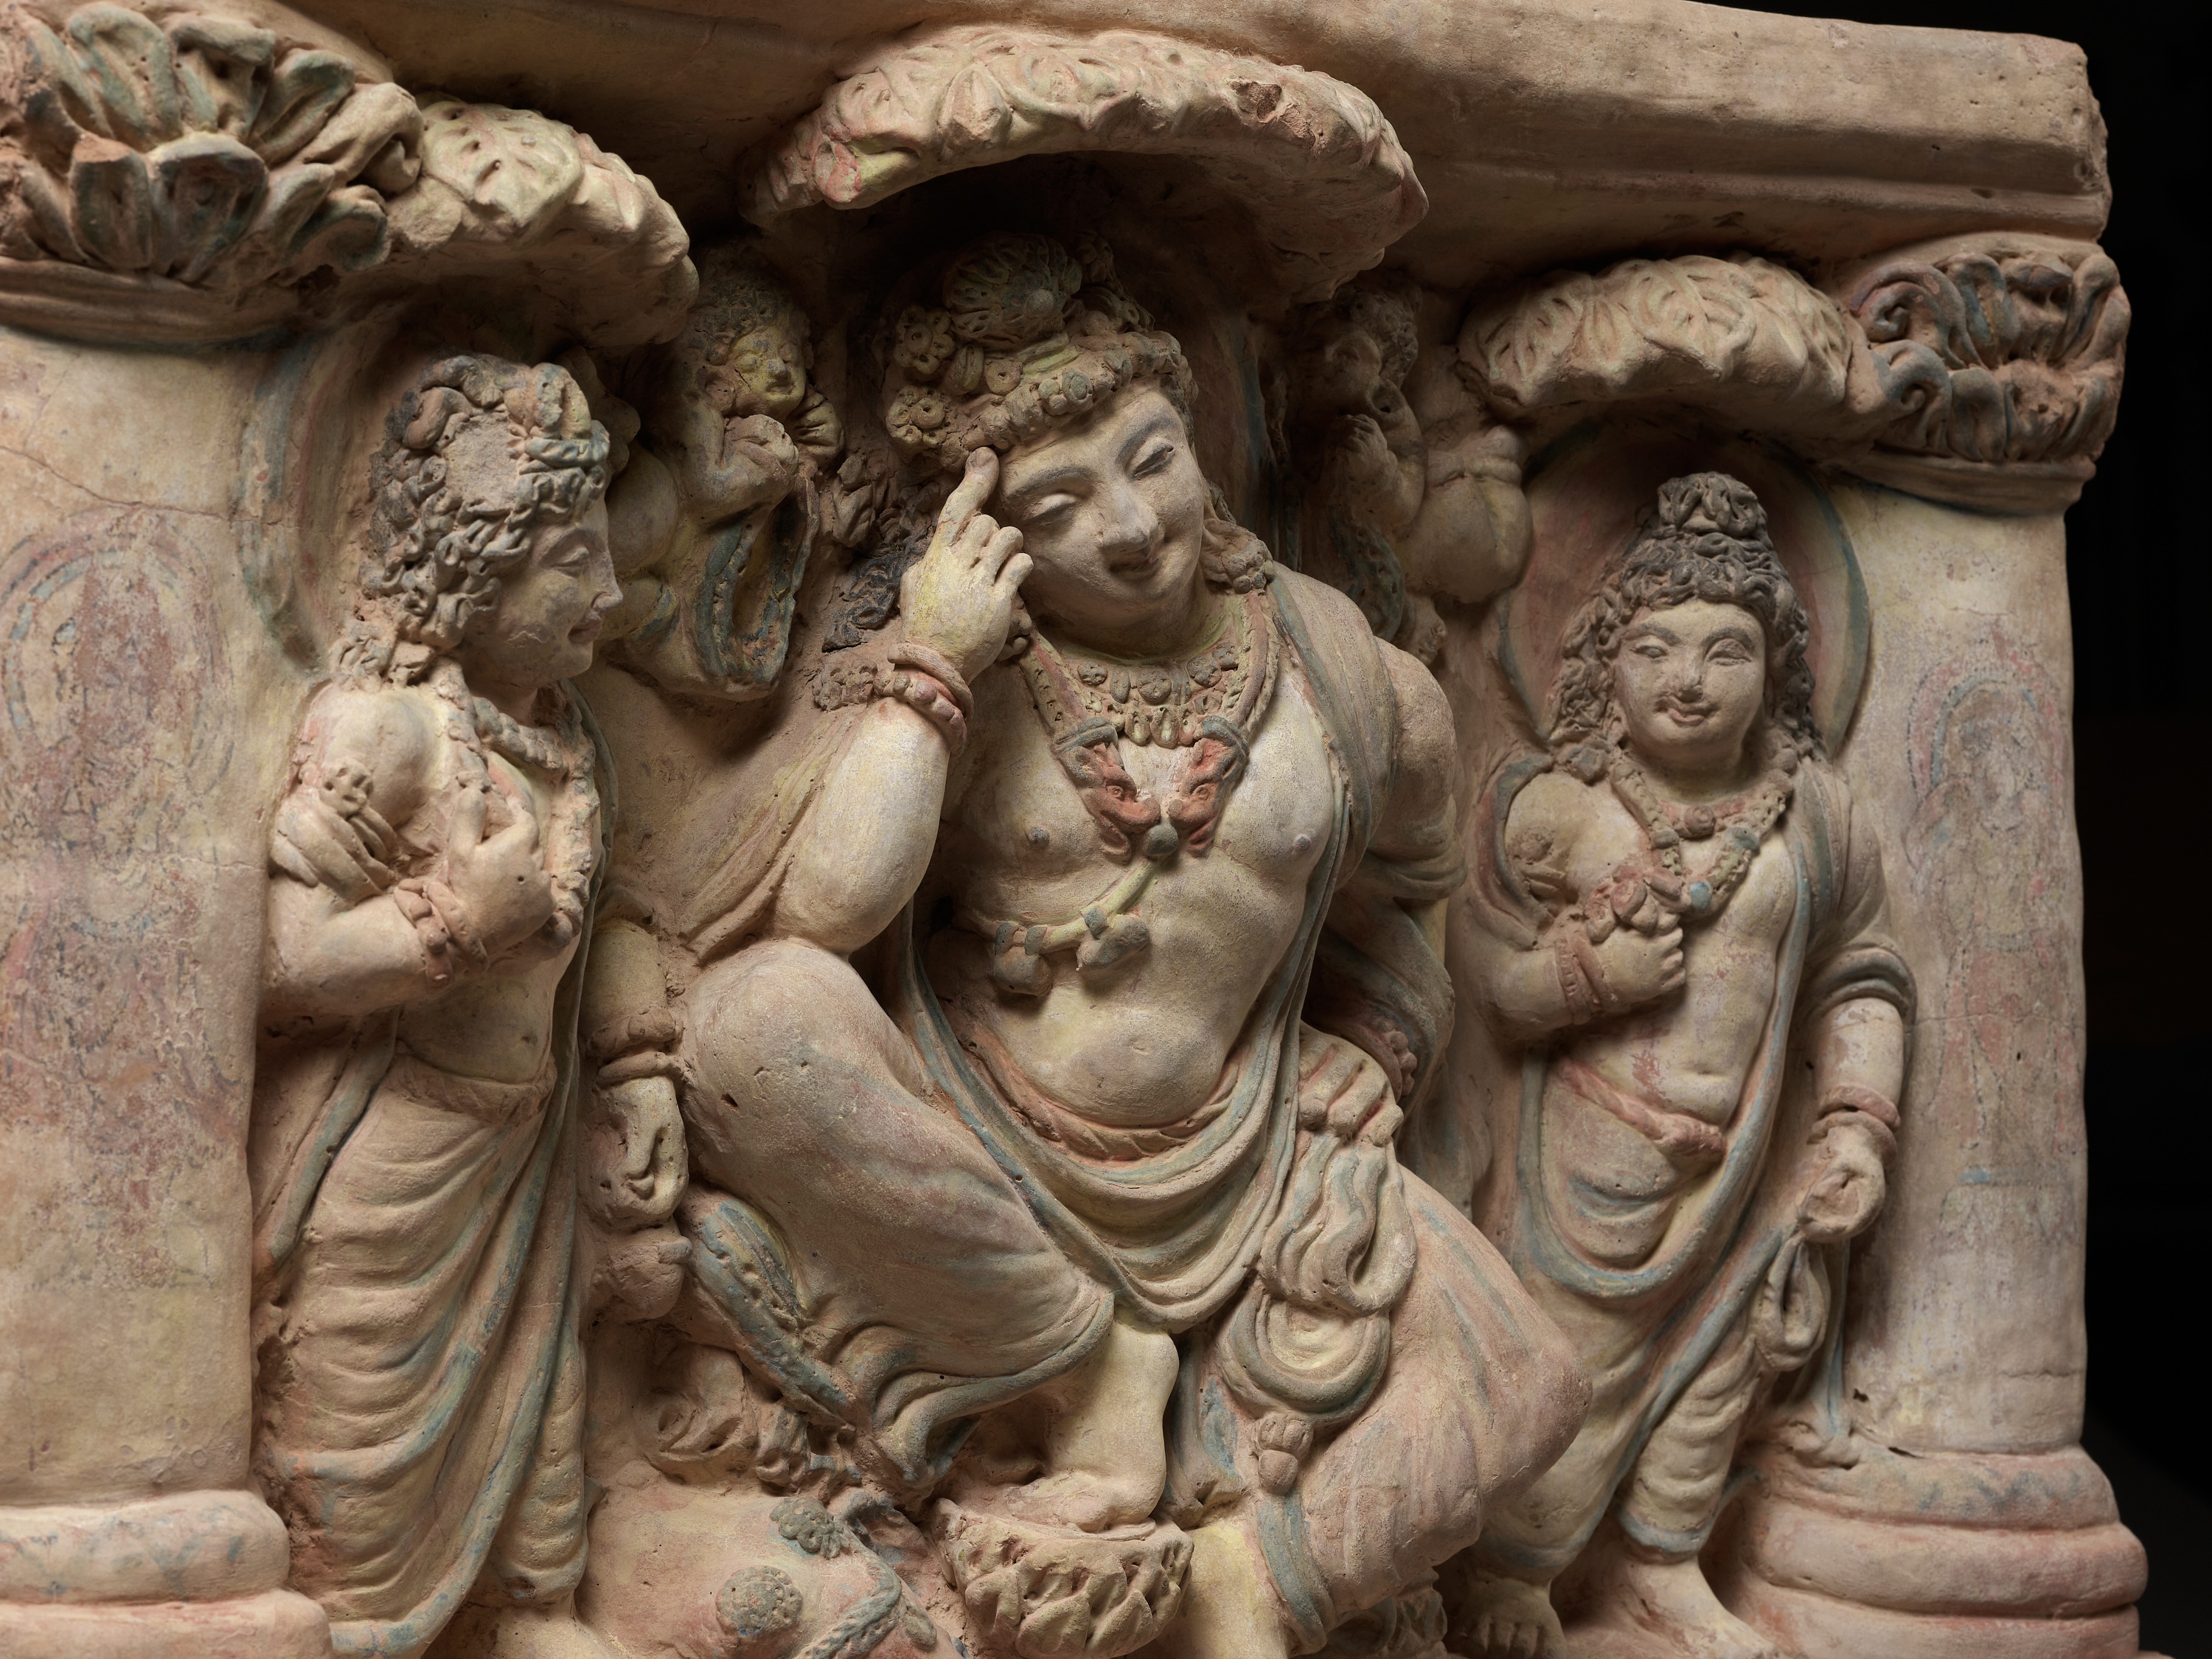 A TERRACOTTA RELIEF OF A THINKING PRINCE SIDDHARTA UNDER THE BODHI TREE, ANCIENT REGION OF GANDHARA - Image 15 of 19